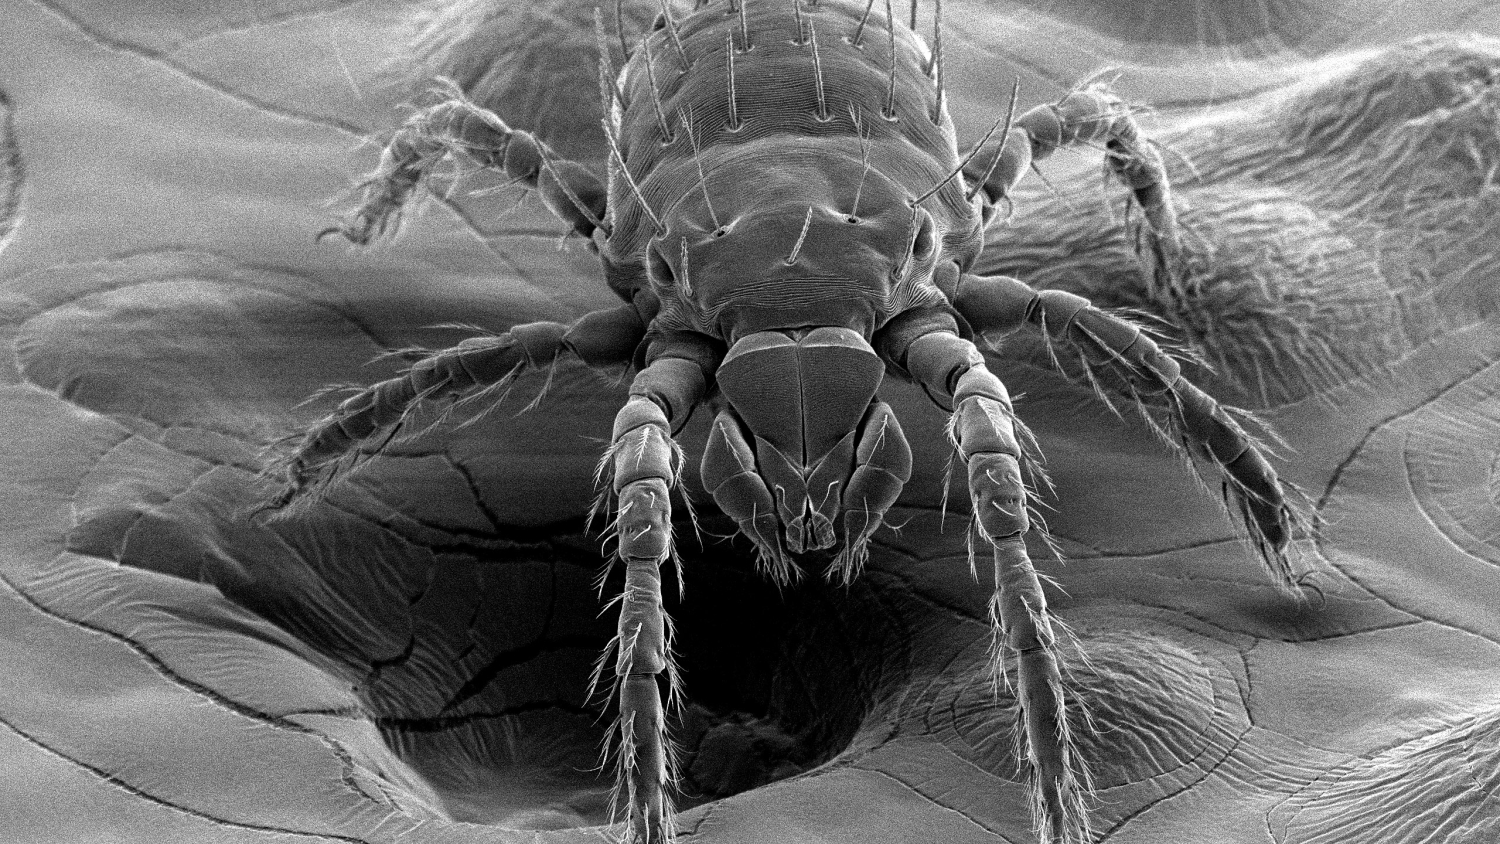 Scanning electron microscopy image of a chigger.